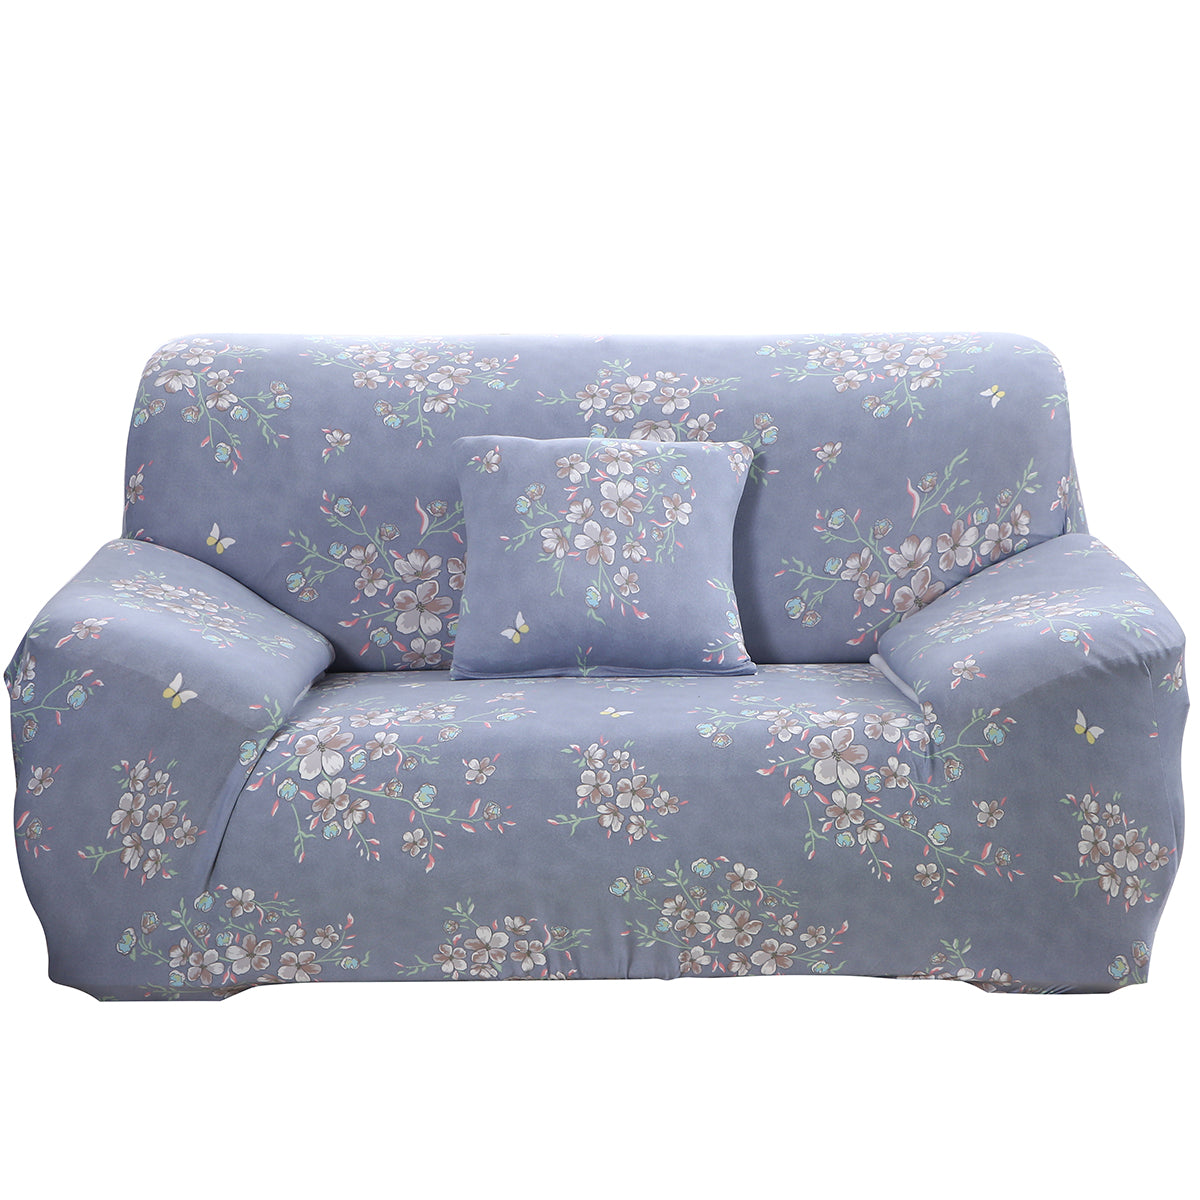 Sofa Cover 1/2/3/4 Seater Printed Stretch Slipcover Couch Cover Furniture Protector